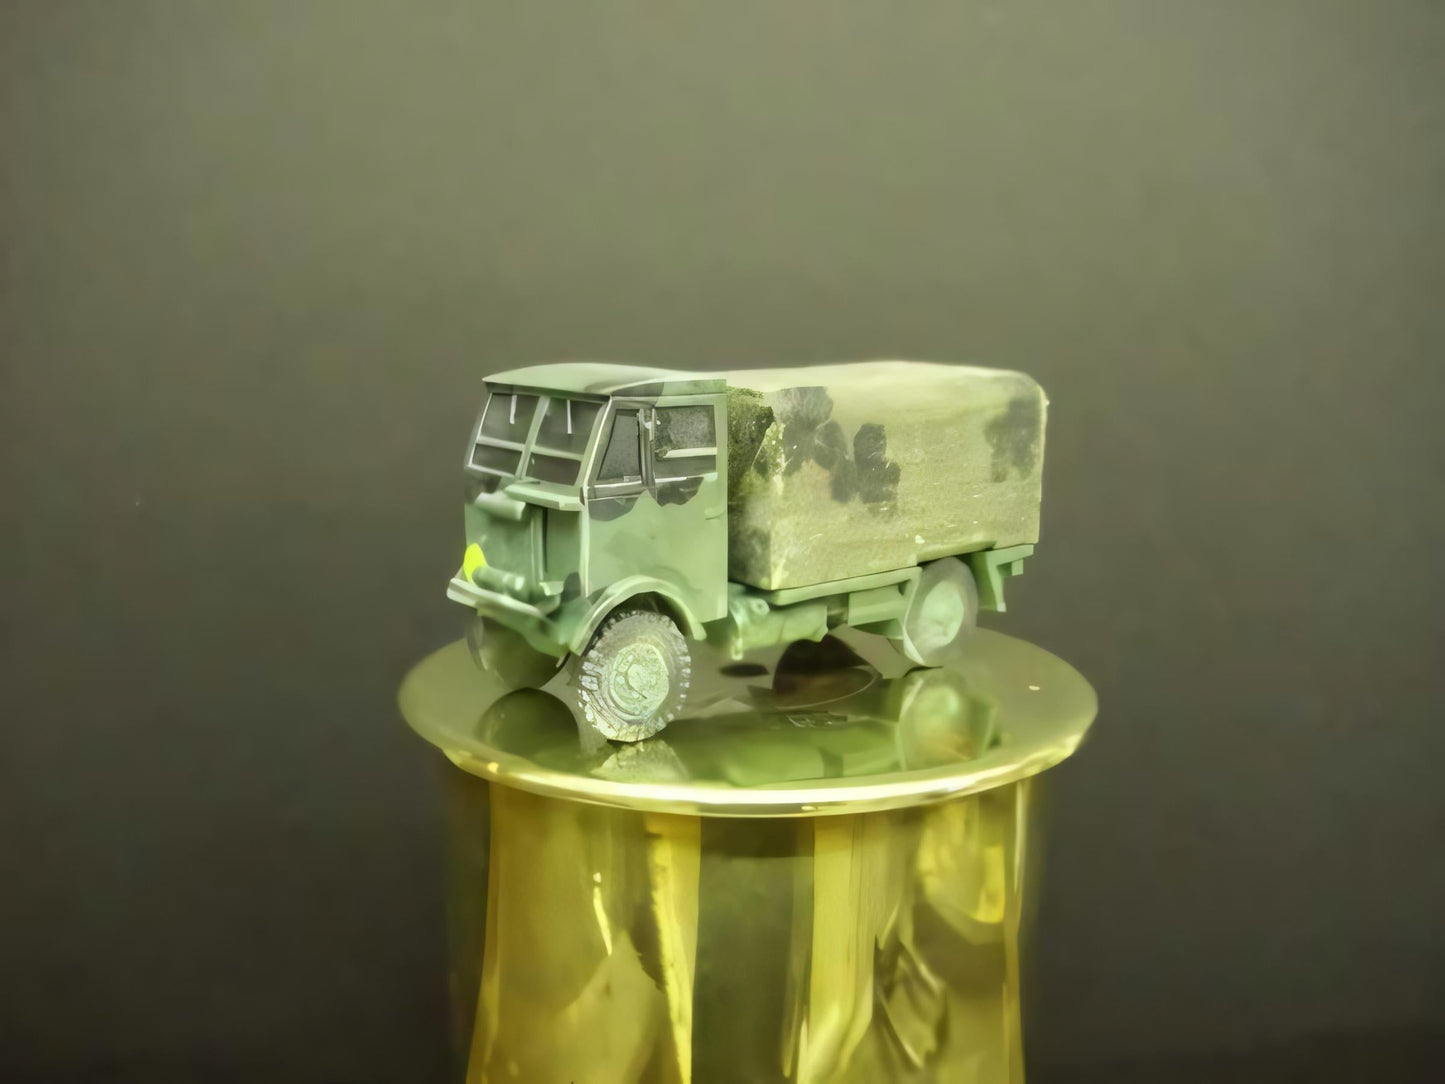 1:72  ALBION FT11 SUPPLY TRUCK